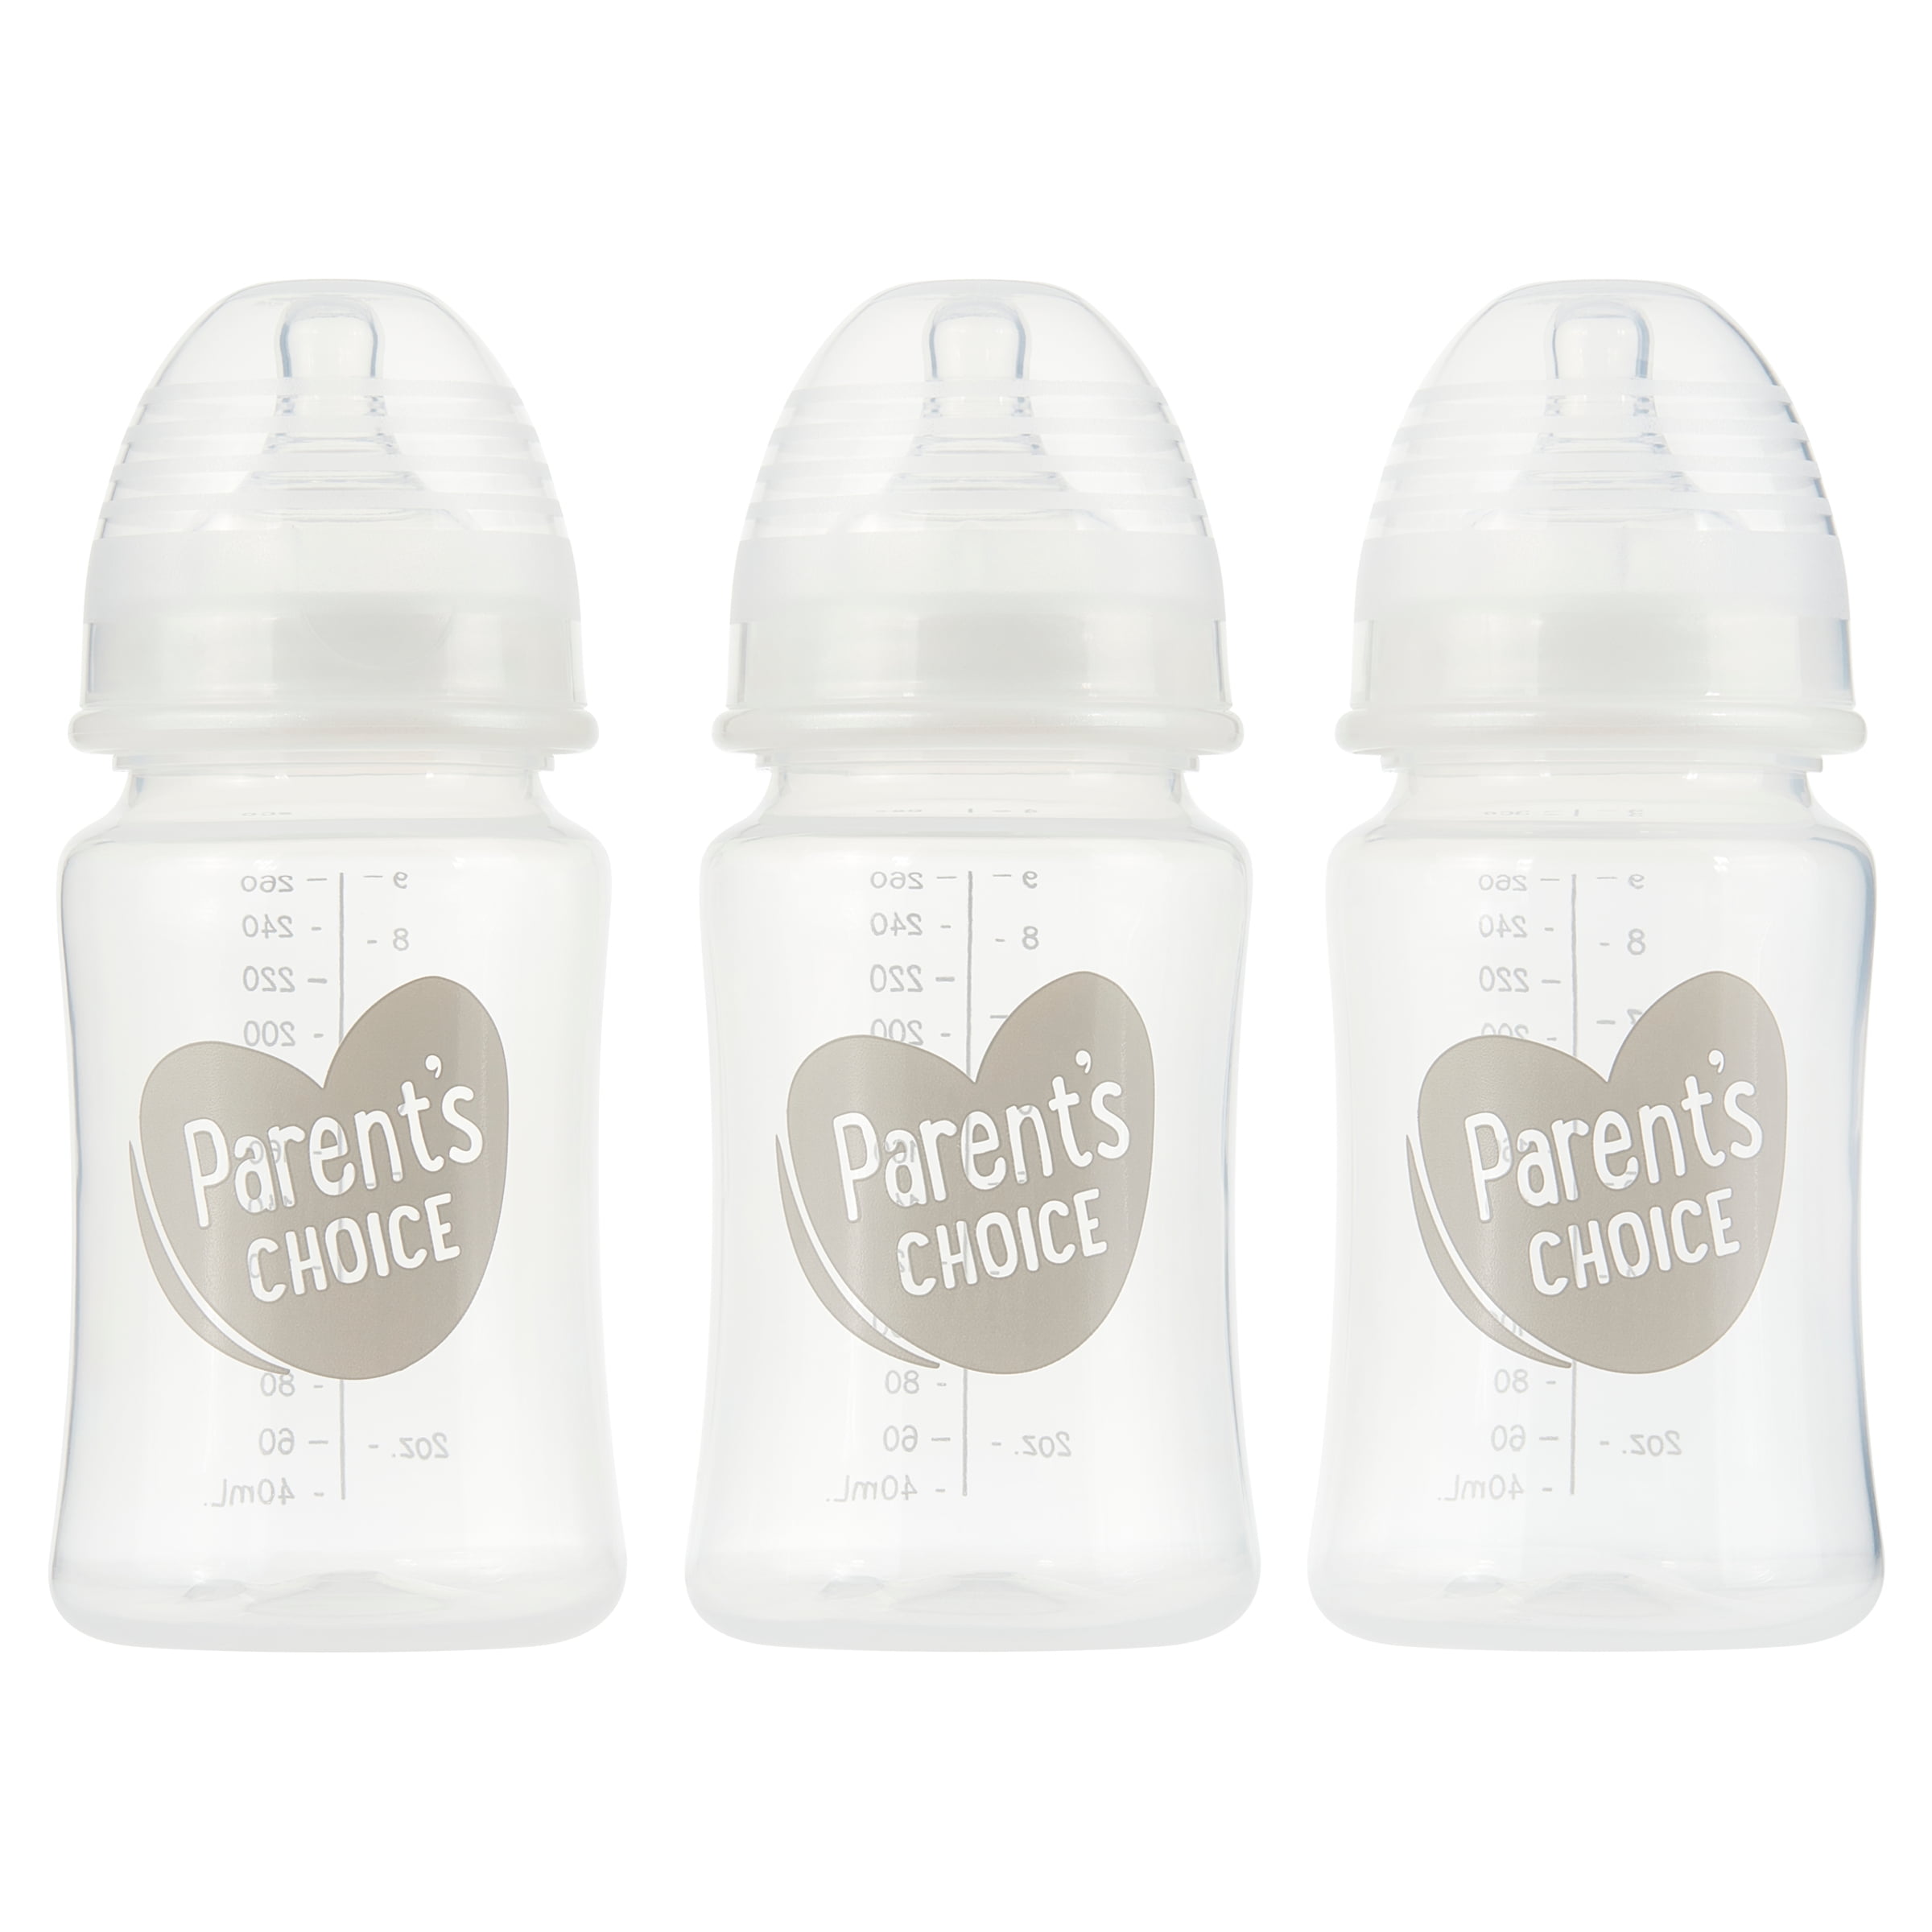 Dr browns, Chicco, Nuk, nonbrand Brand new baby bottles 